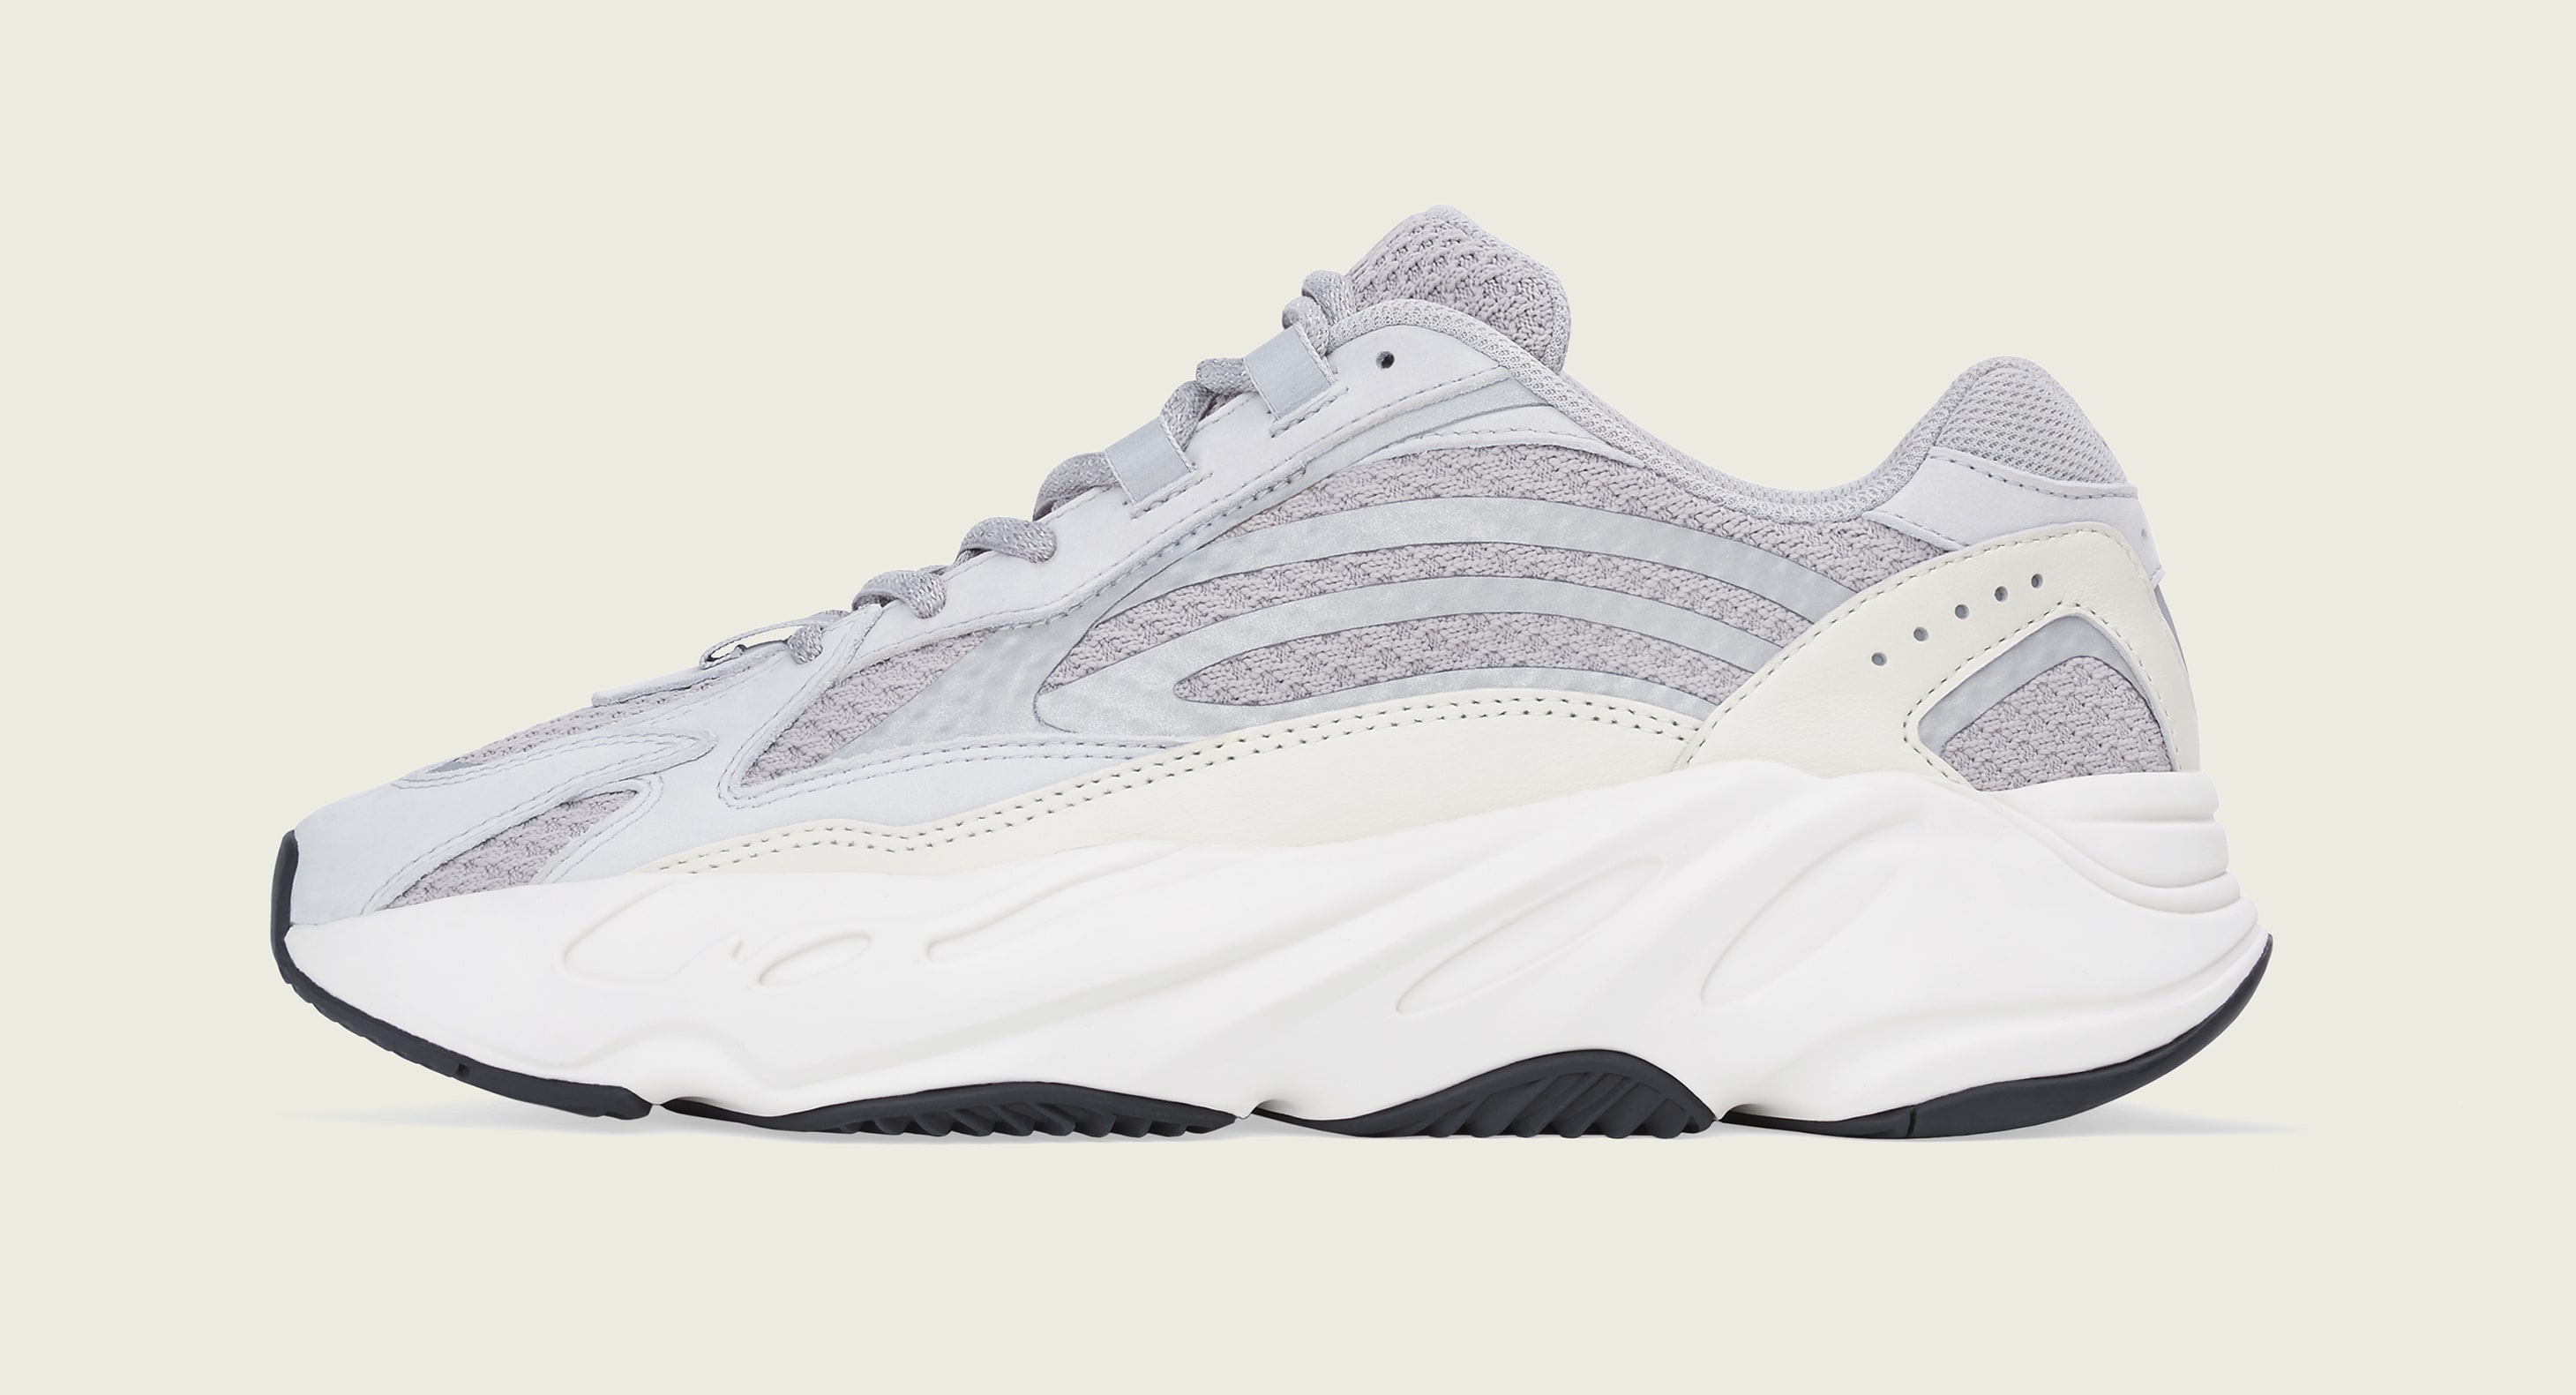 Adidas Yeezy Boost 700 V2 'Static' Release Date 2022 | Sole Collector